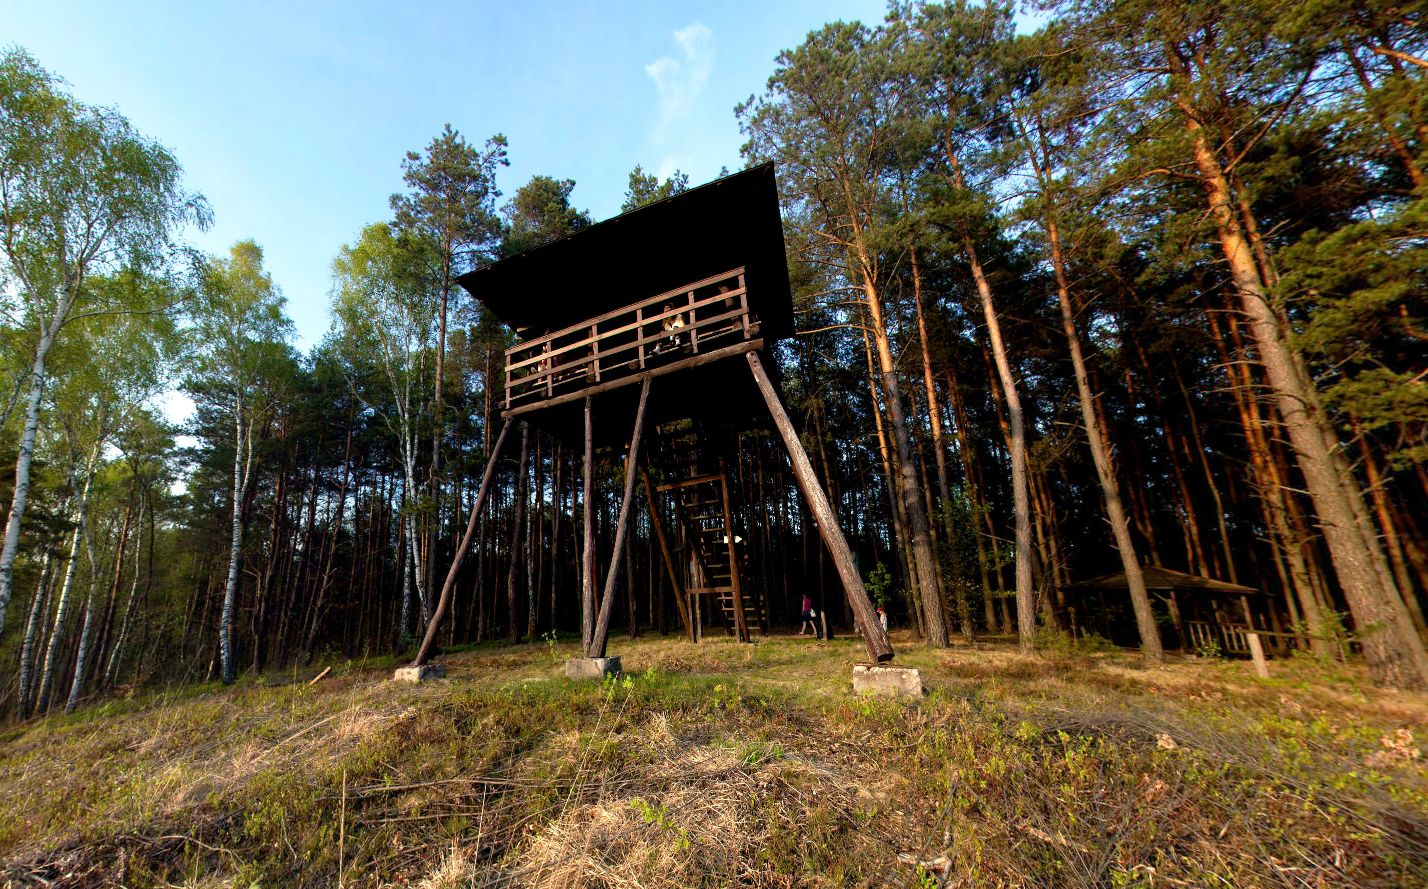 Observation tower on the edge of Durny Swamp